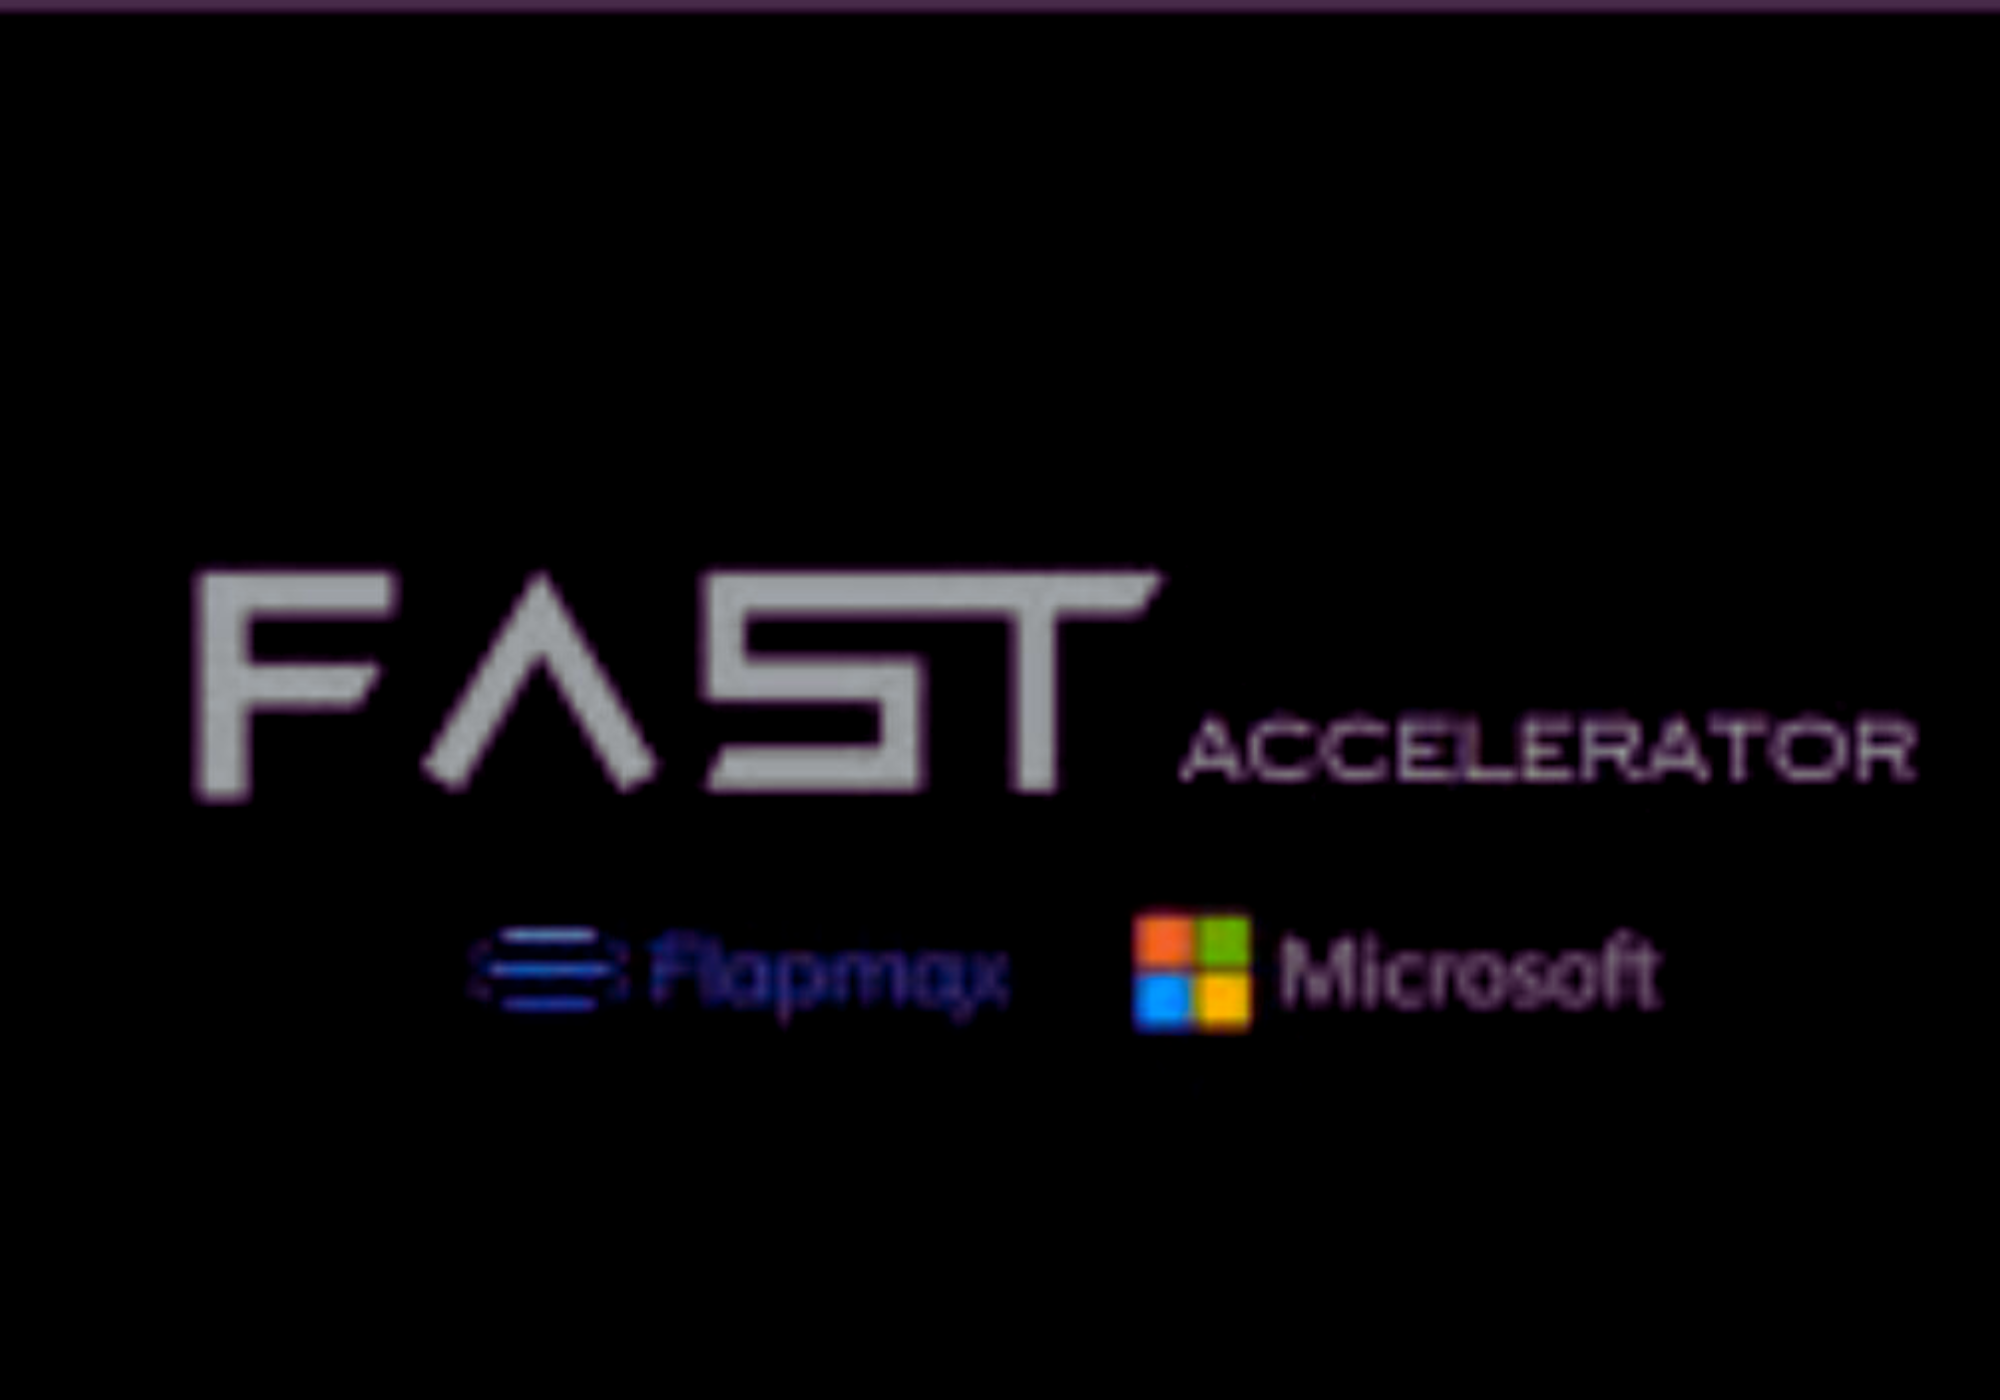 Microsoft-backed FAST Accelerator Announces 12 African Startups Selected For Its FA23